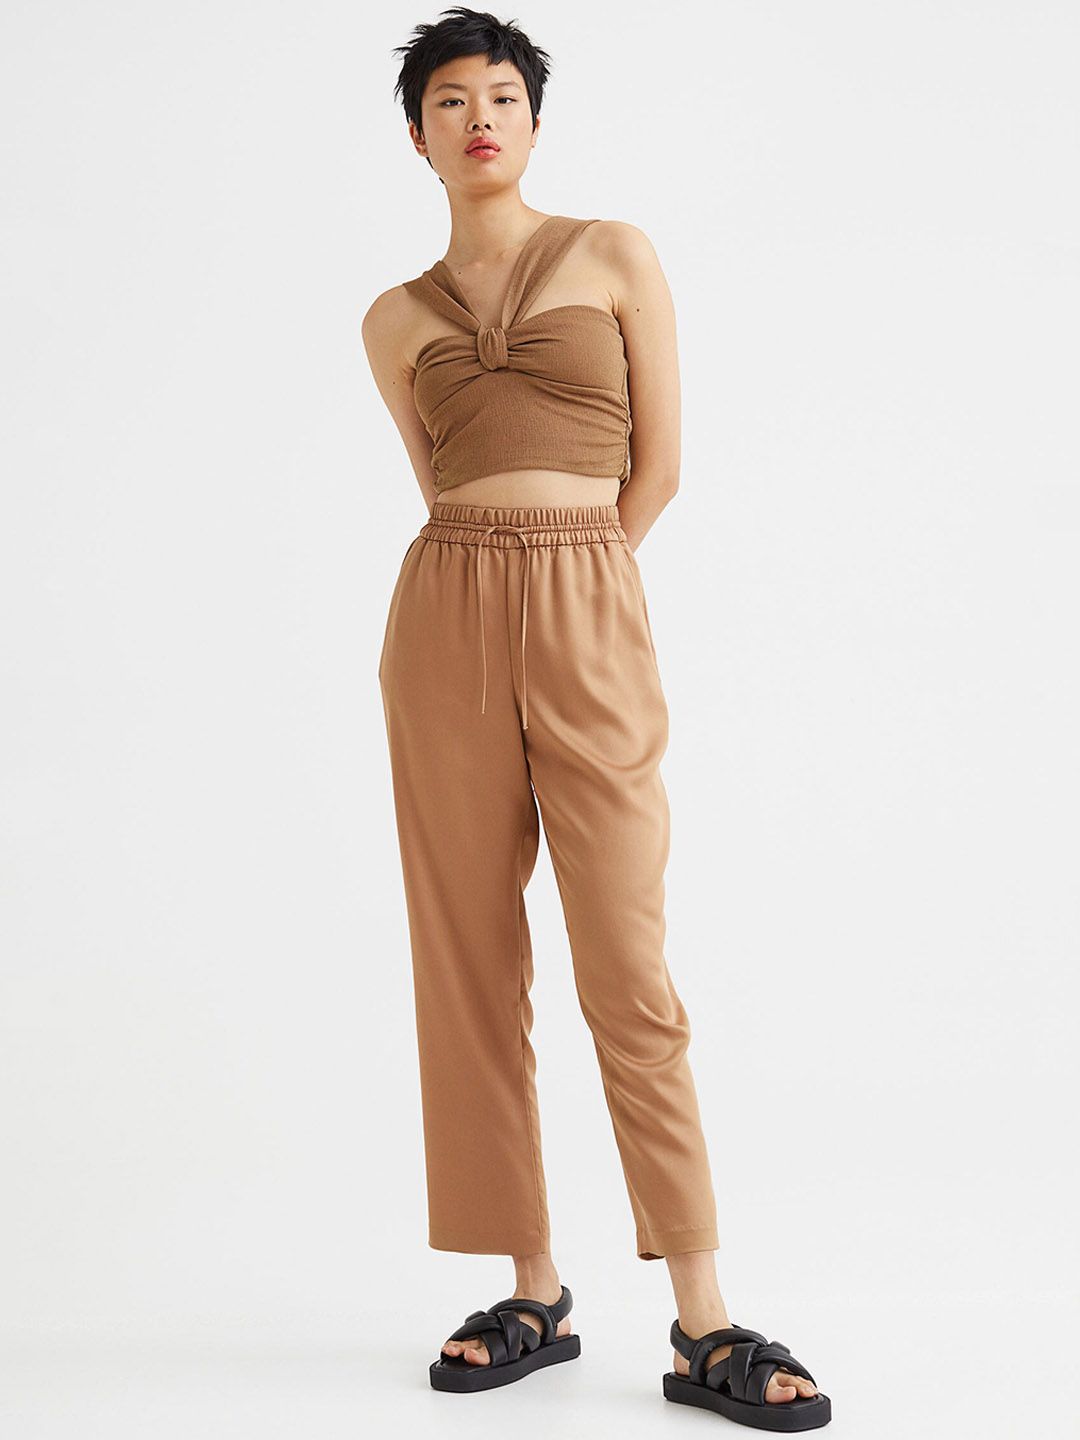 H&M Women Beige Pull-On Lyocell-Blend Trousers Price in India